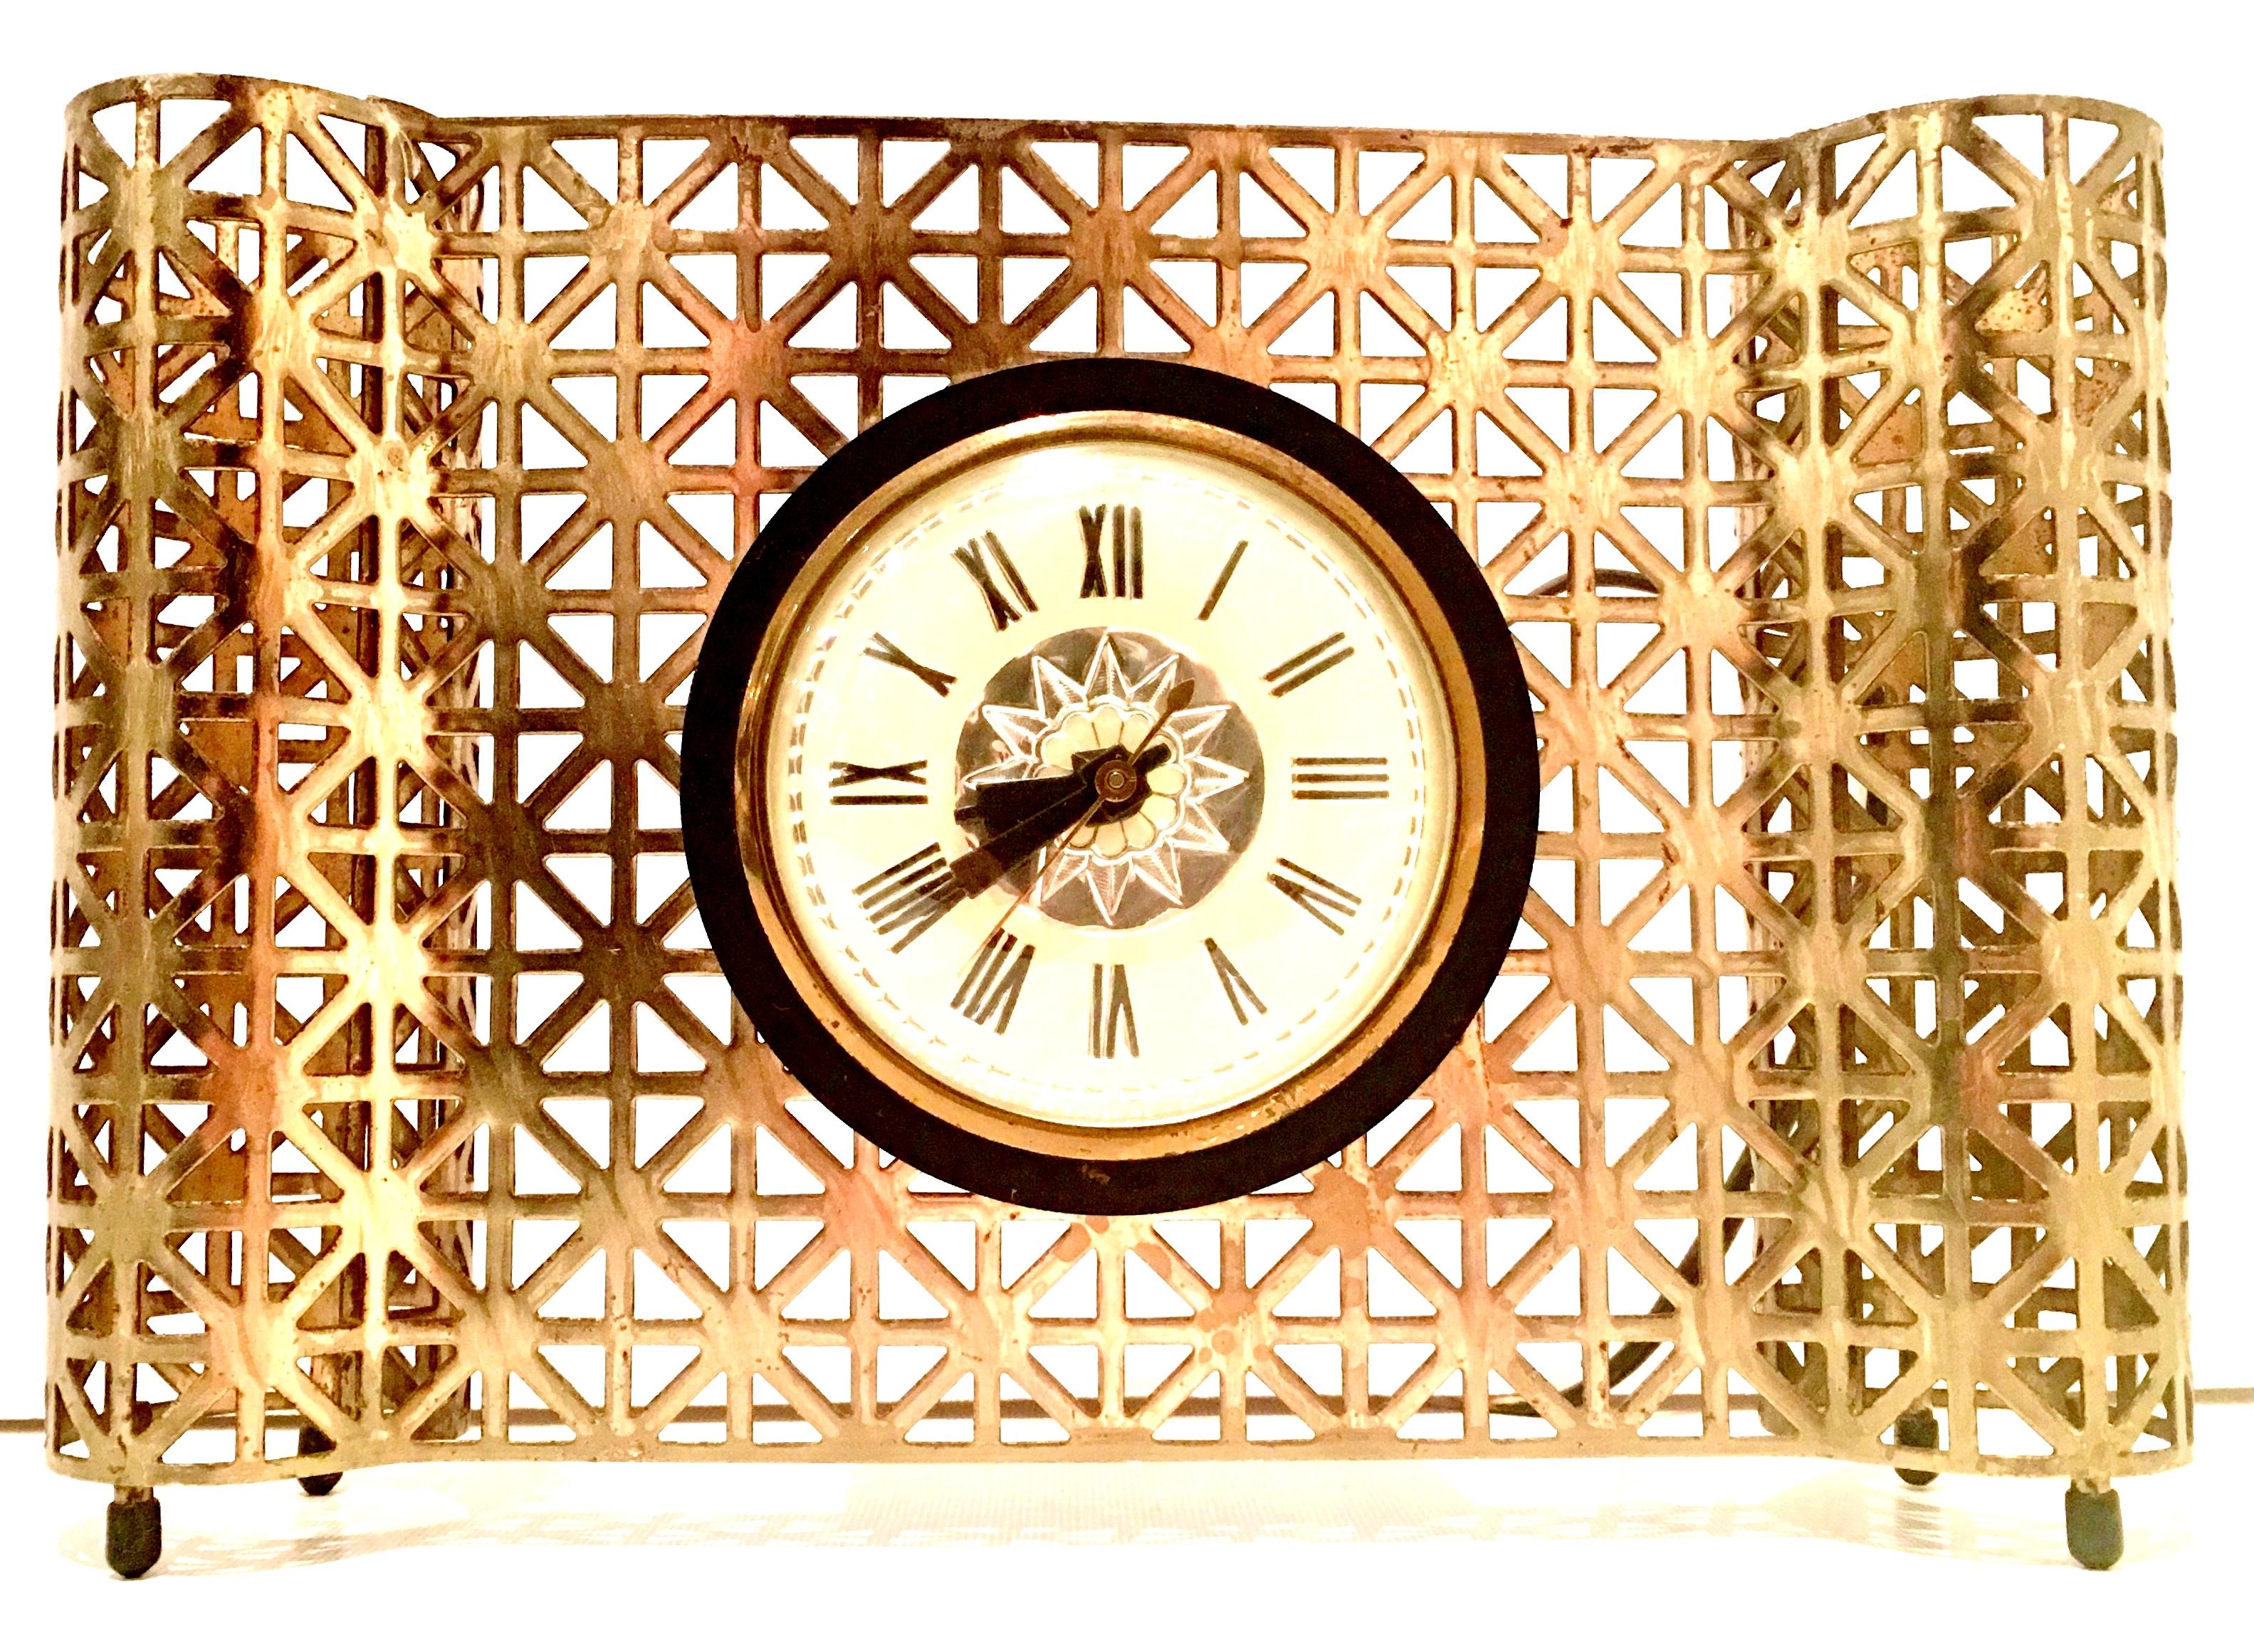 Mid-20th century American Art Deco gilt brass electrified desk or mantle clock by, Bilt - Rite Mfg. Com Inc. Chicago, Illinois. This lovely clock is electrified and operational, wired for the USA. Features a geometric perforated pattern with rubber